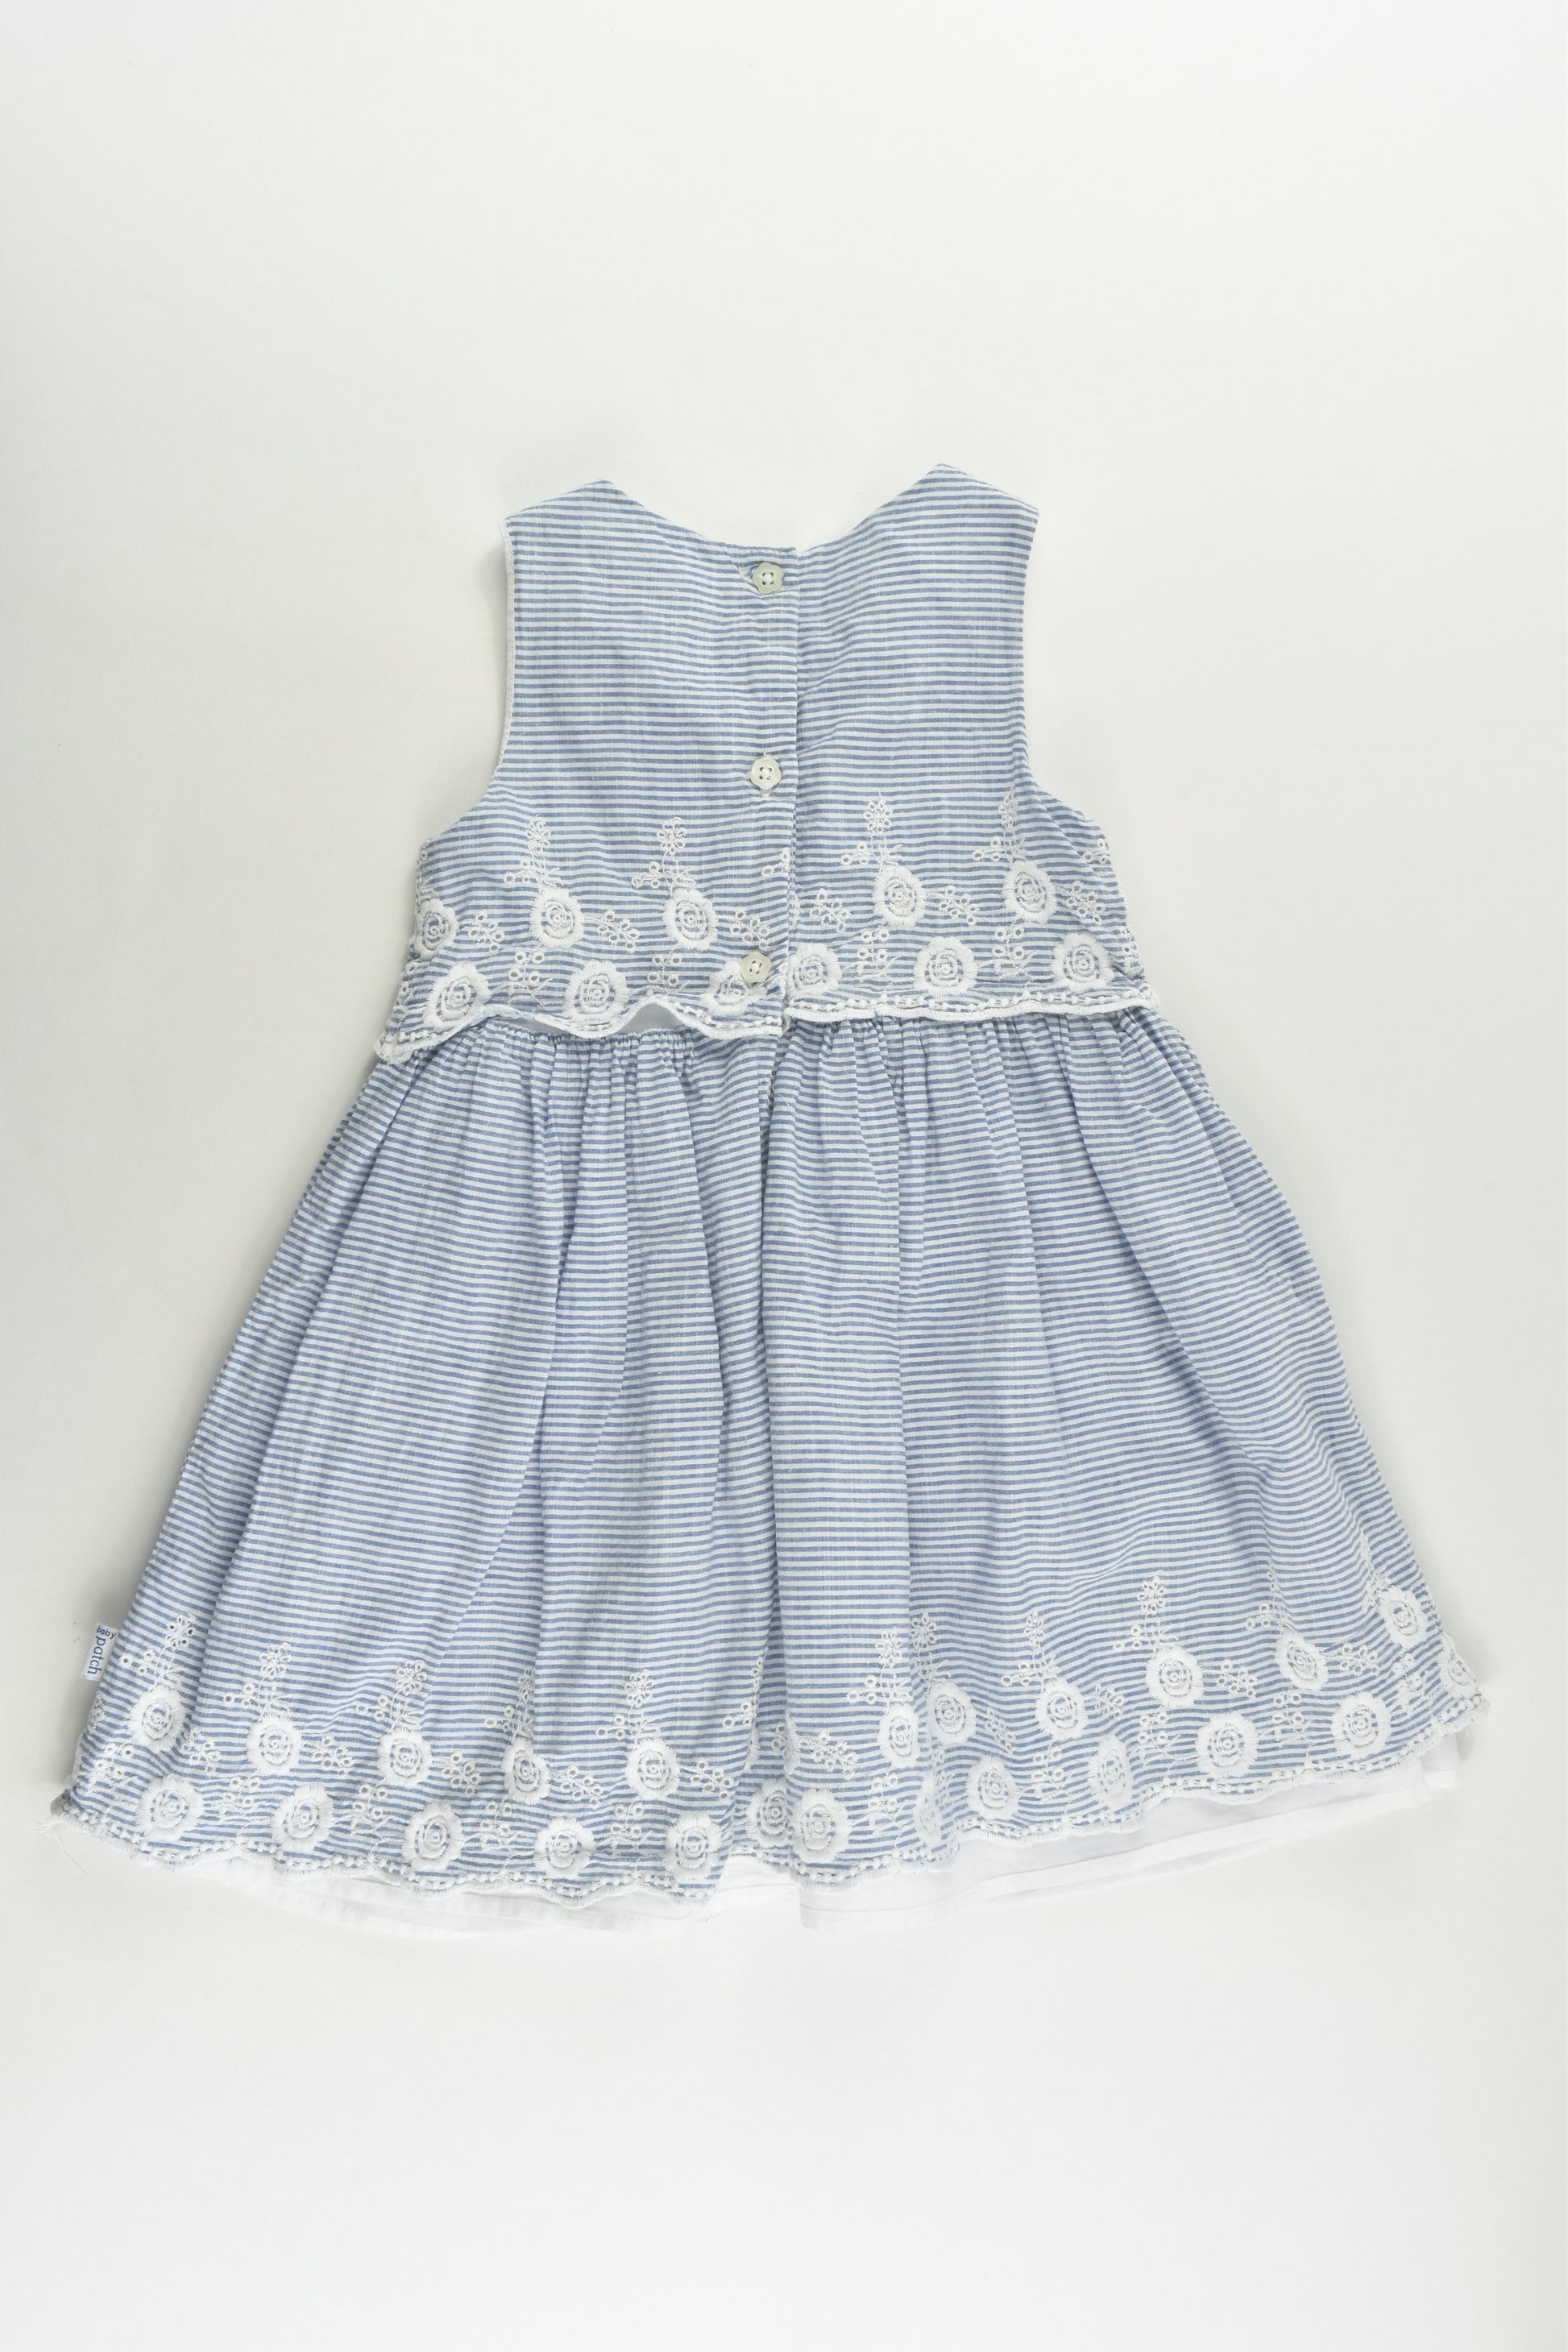 Pumpkin Patch Size 1 (12-18 months) Lined Dress with Lace Details